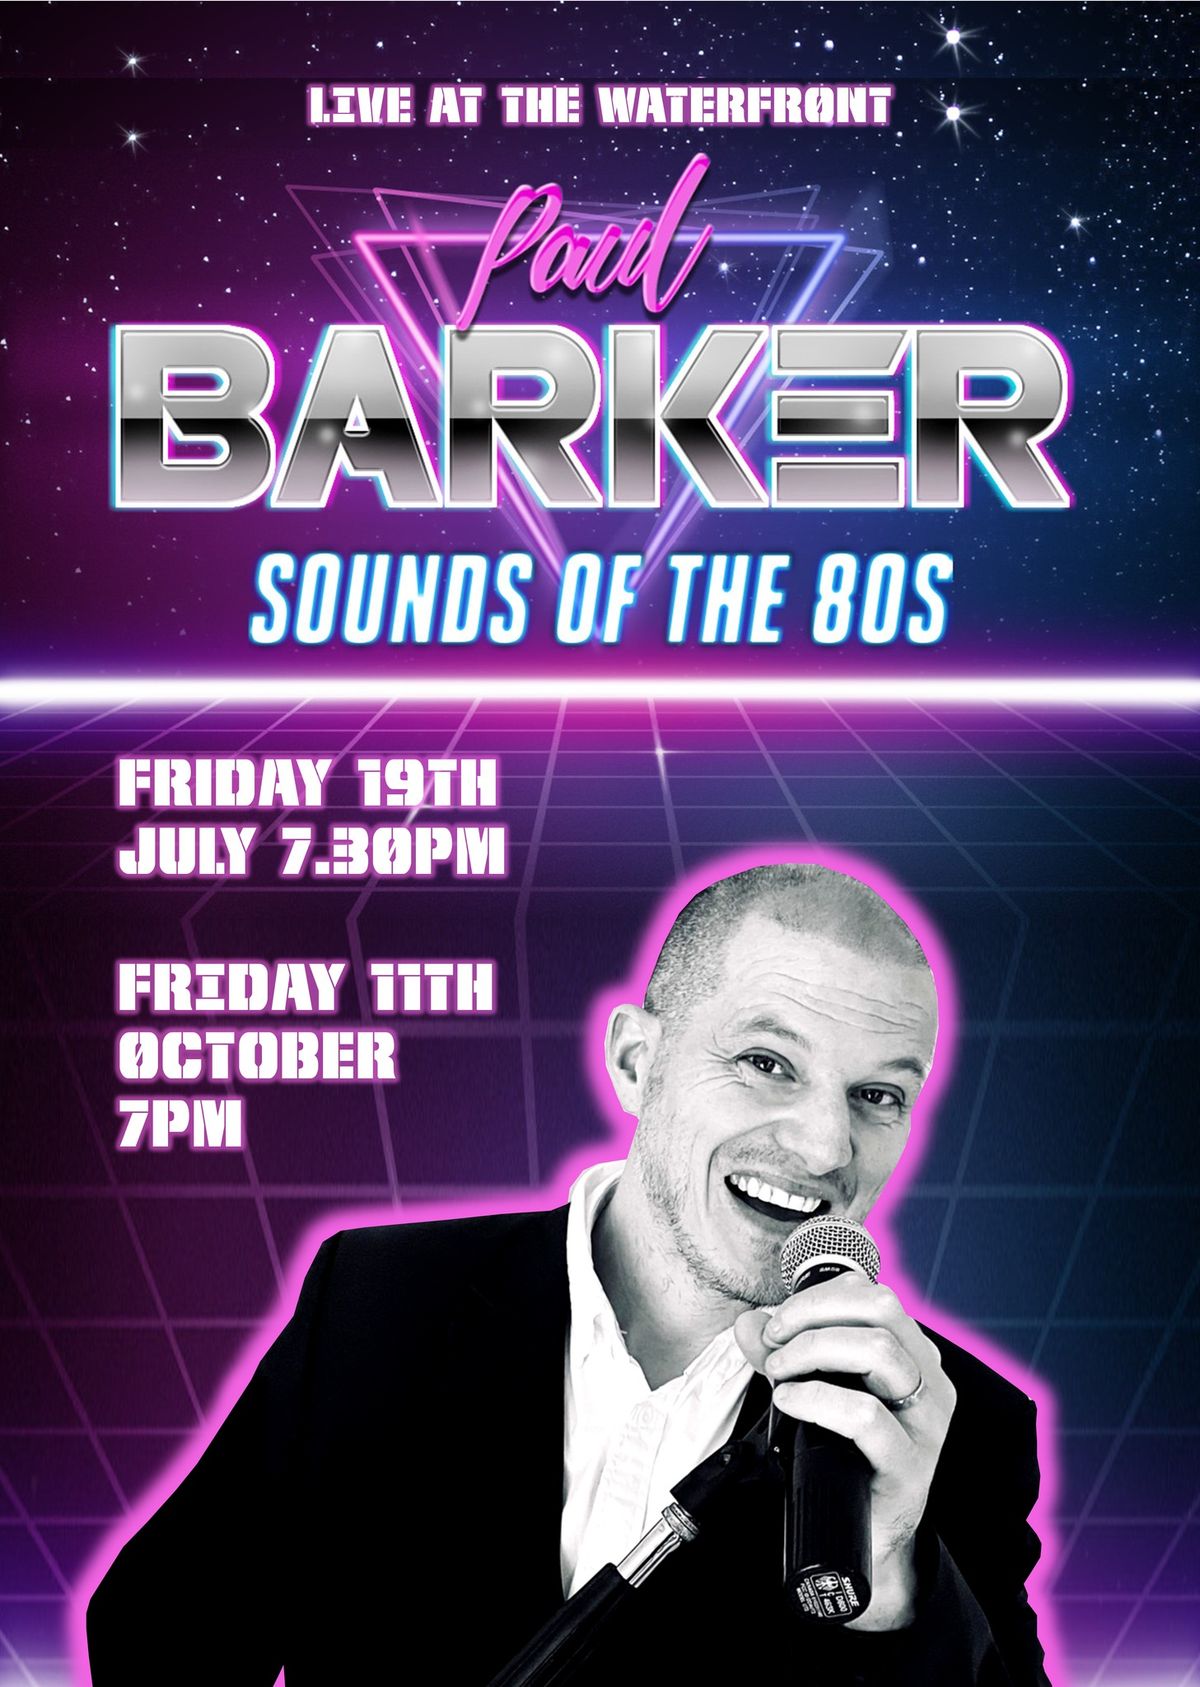 Friday Night Live - Sounds of The 80s! By Paul Barker